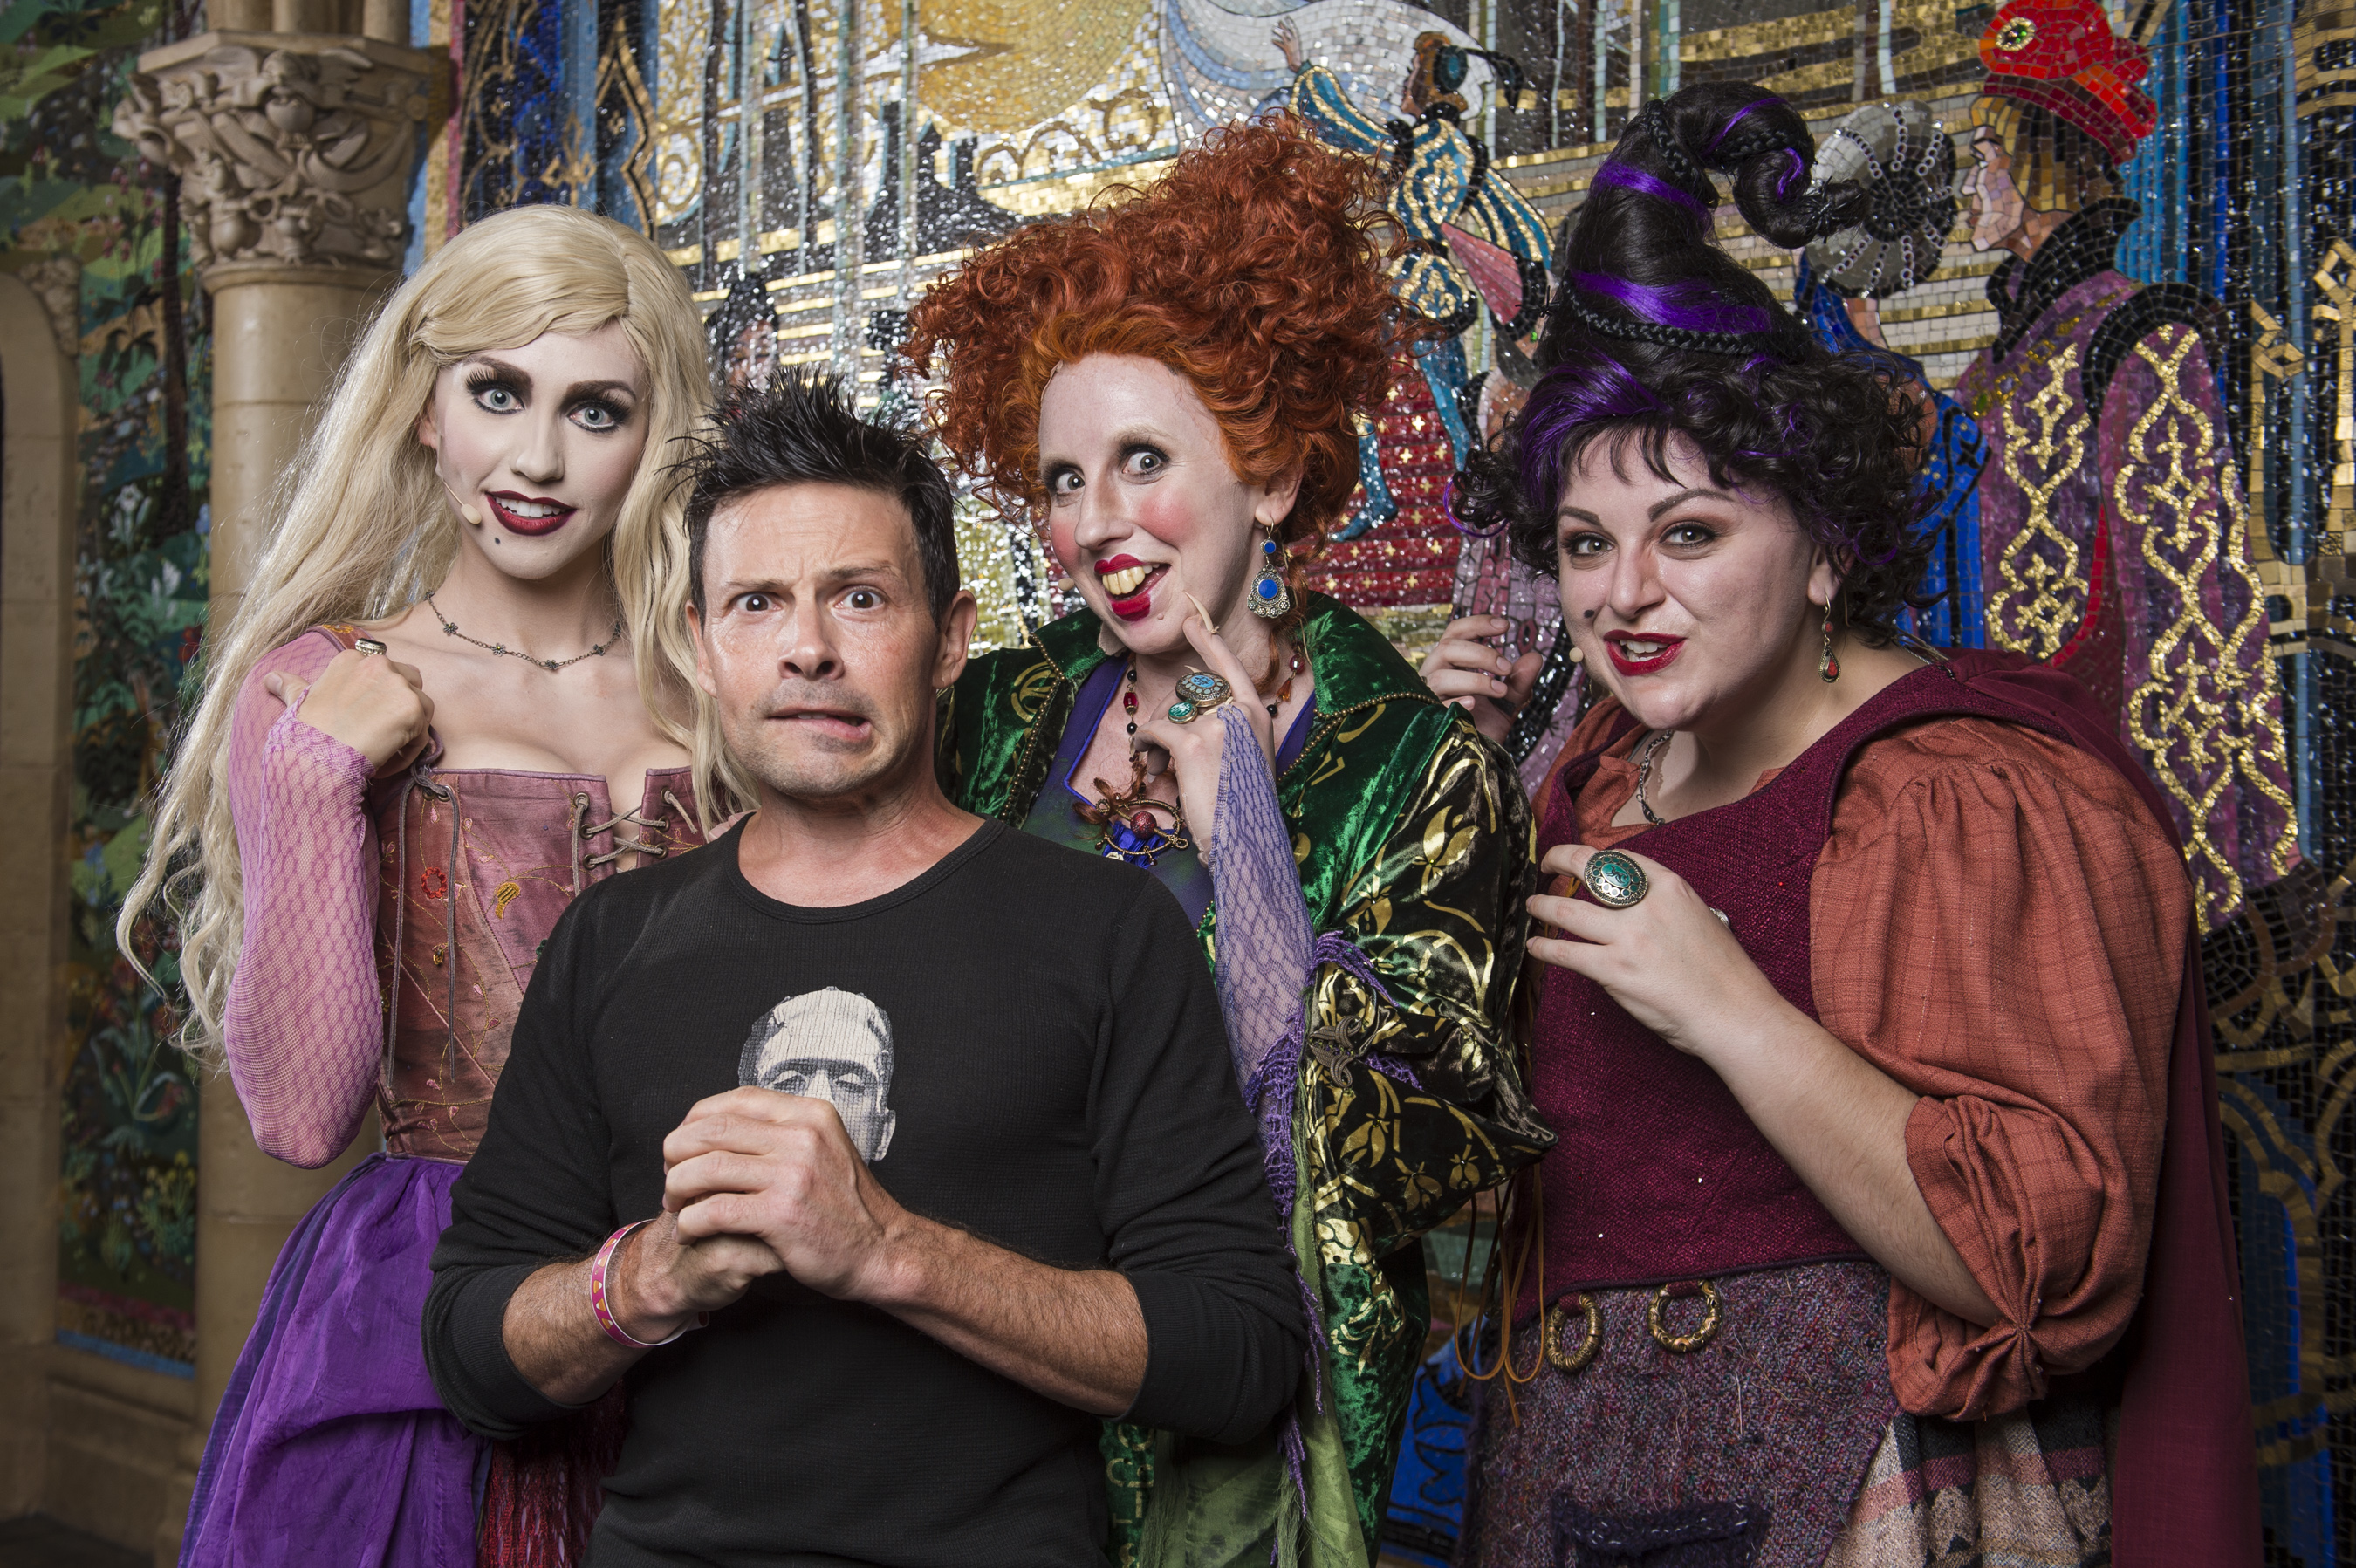 'Hocus Pocus' cast member Jason Marsden takes a photo with the Sanderson sisters at Walt Disney World.  Hocus Pocus 2 now has an official release date.